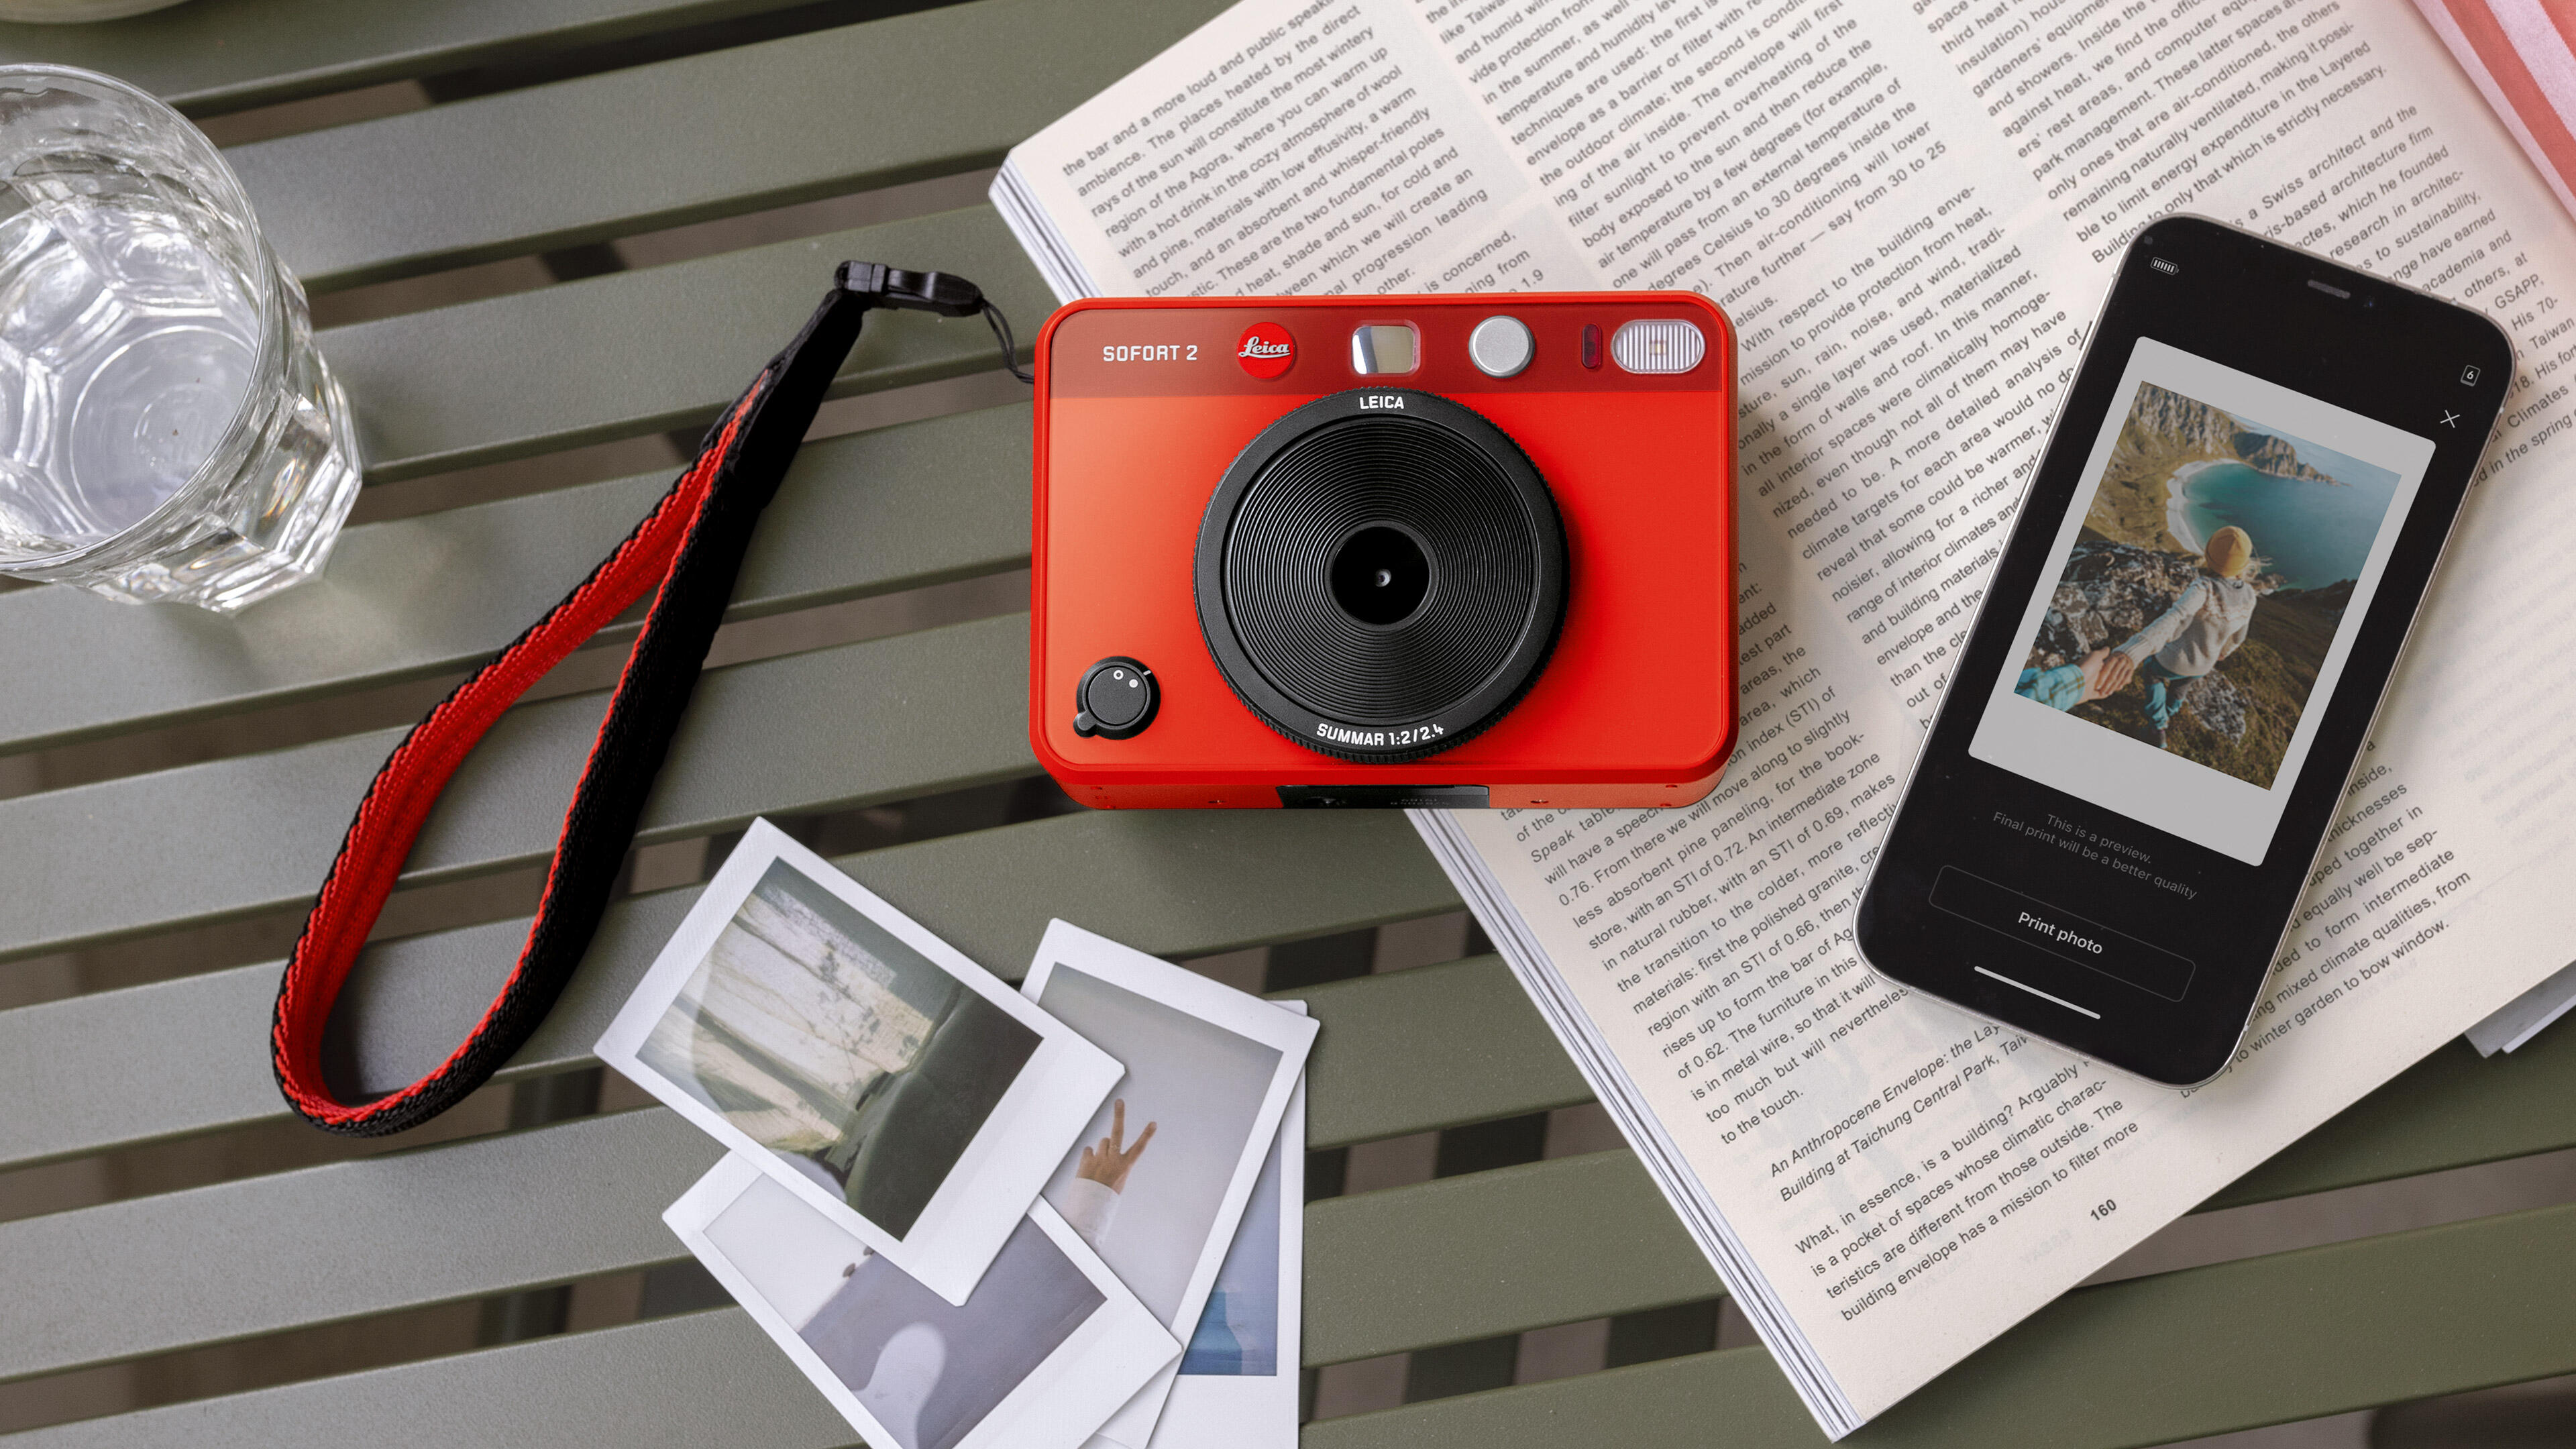 Leica Sofort 2 red, a mobile phone and prints on a table.